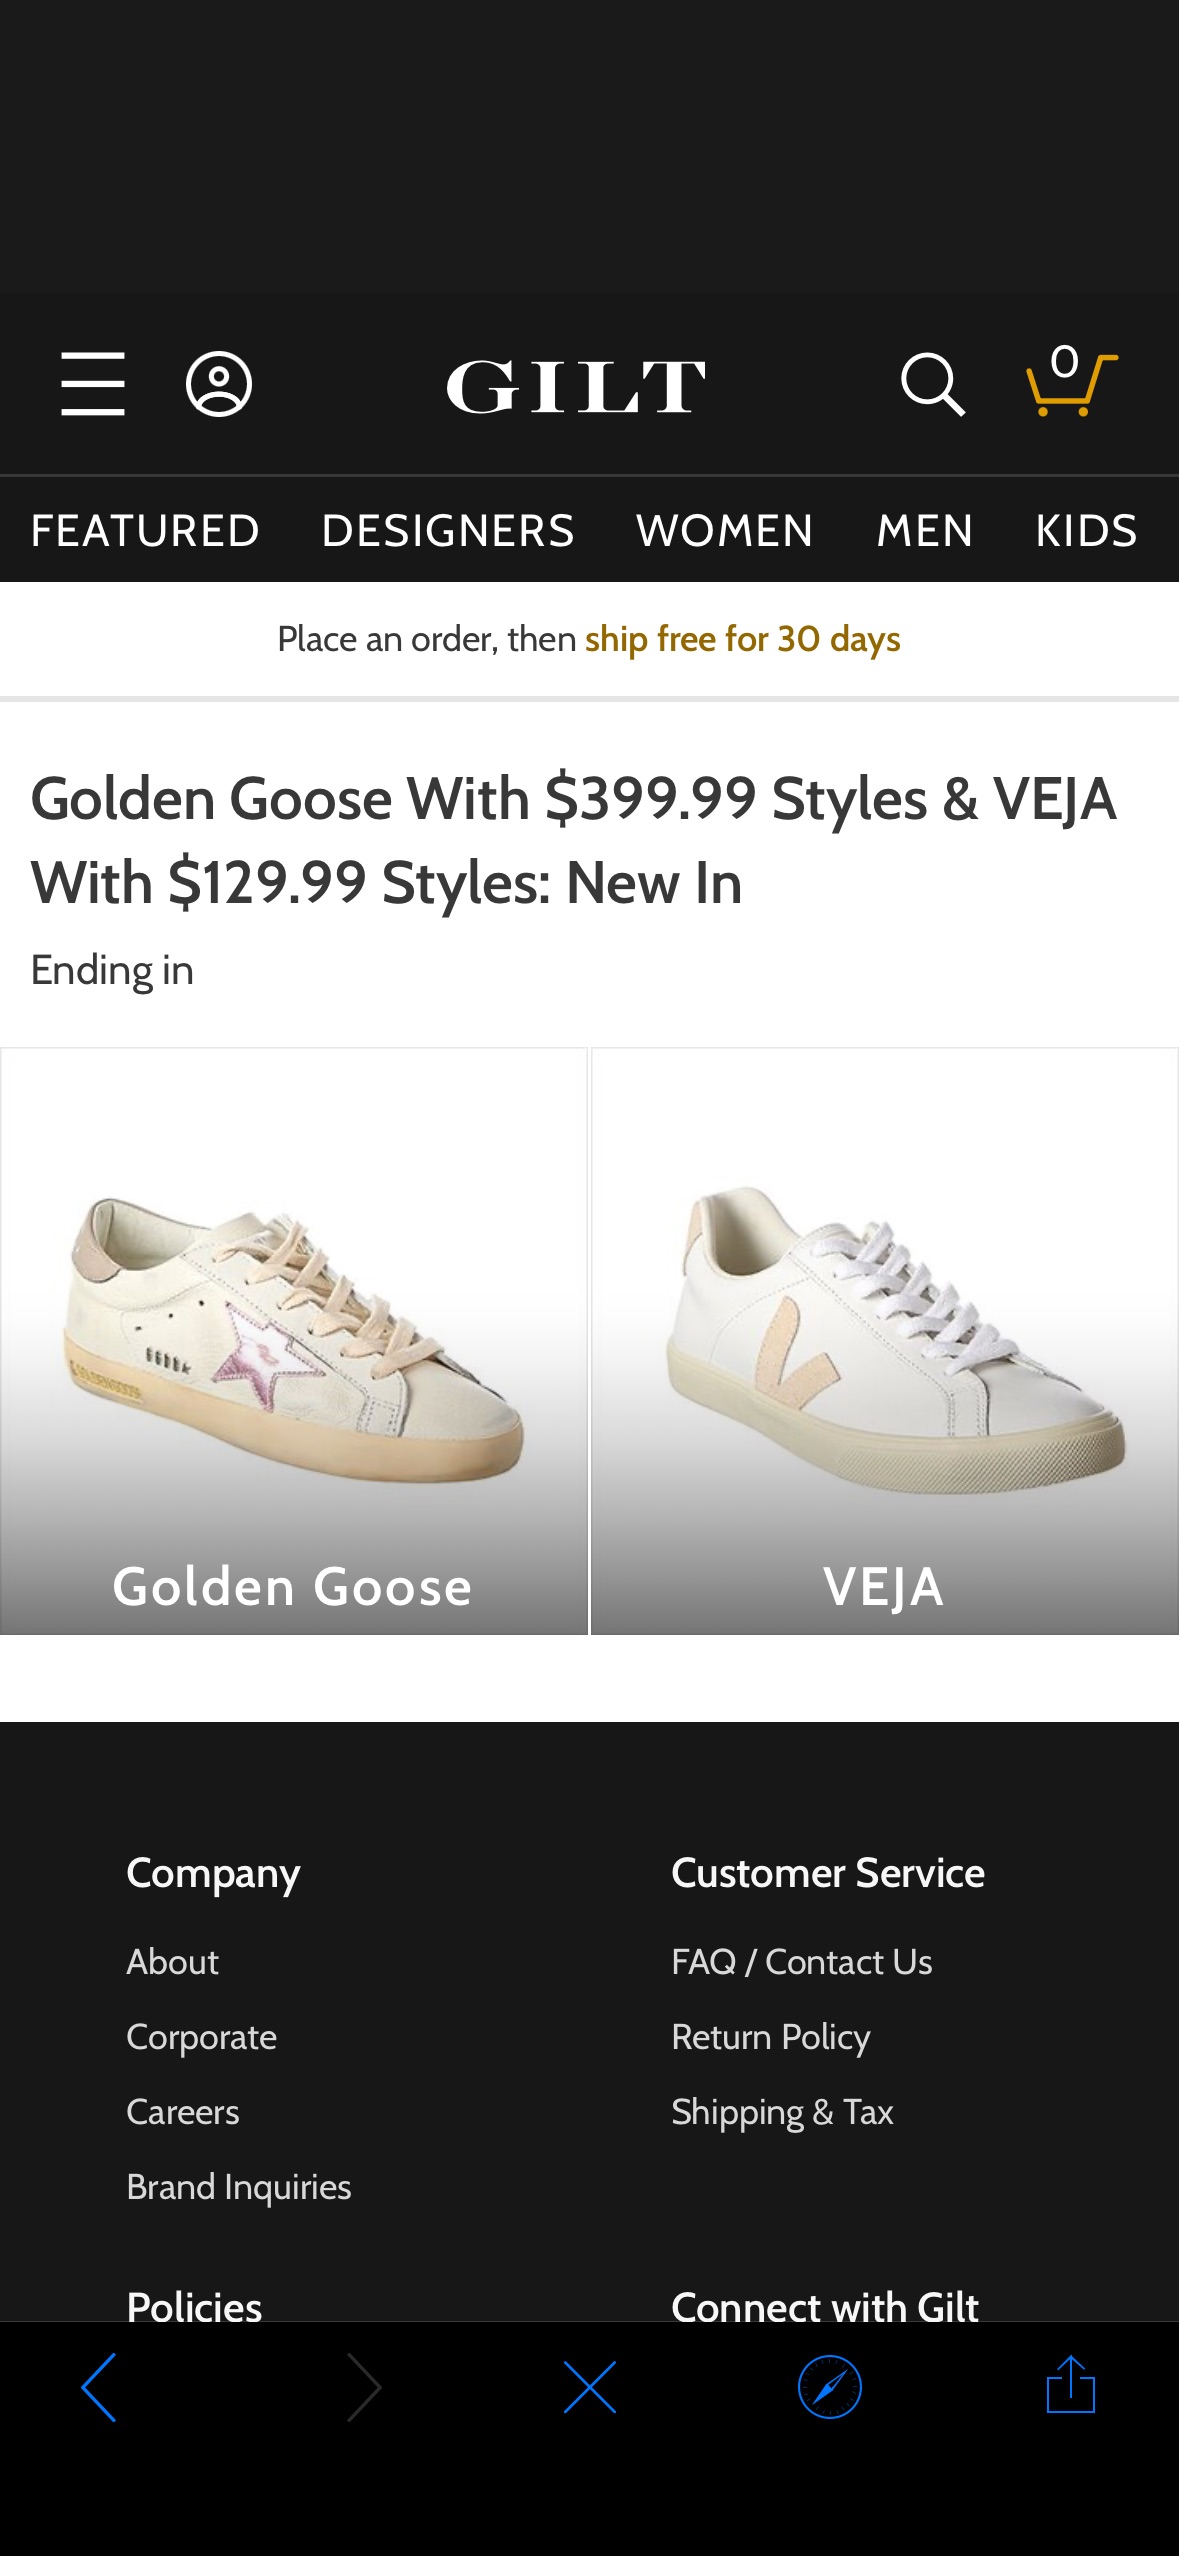 Golden Goose With $399.99 Styles & VEJA With $129.99 Styles: New In / Gilt